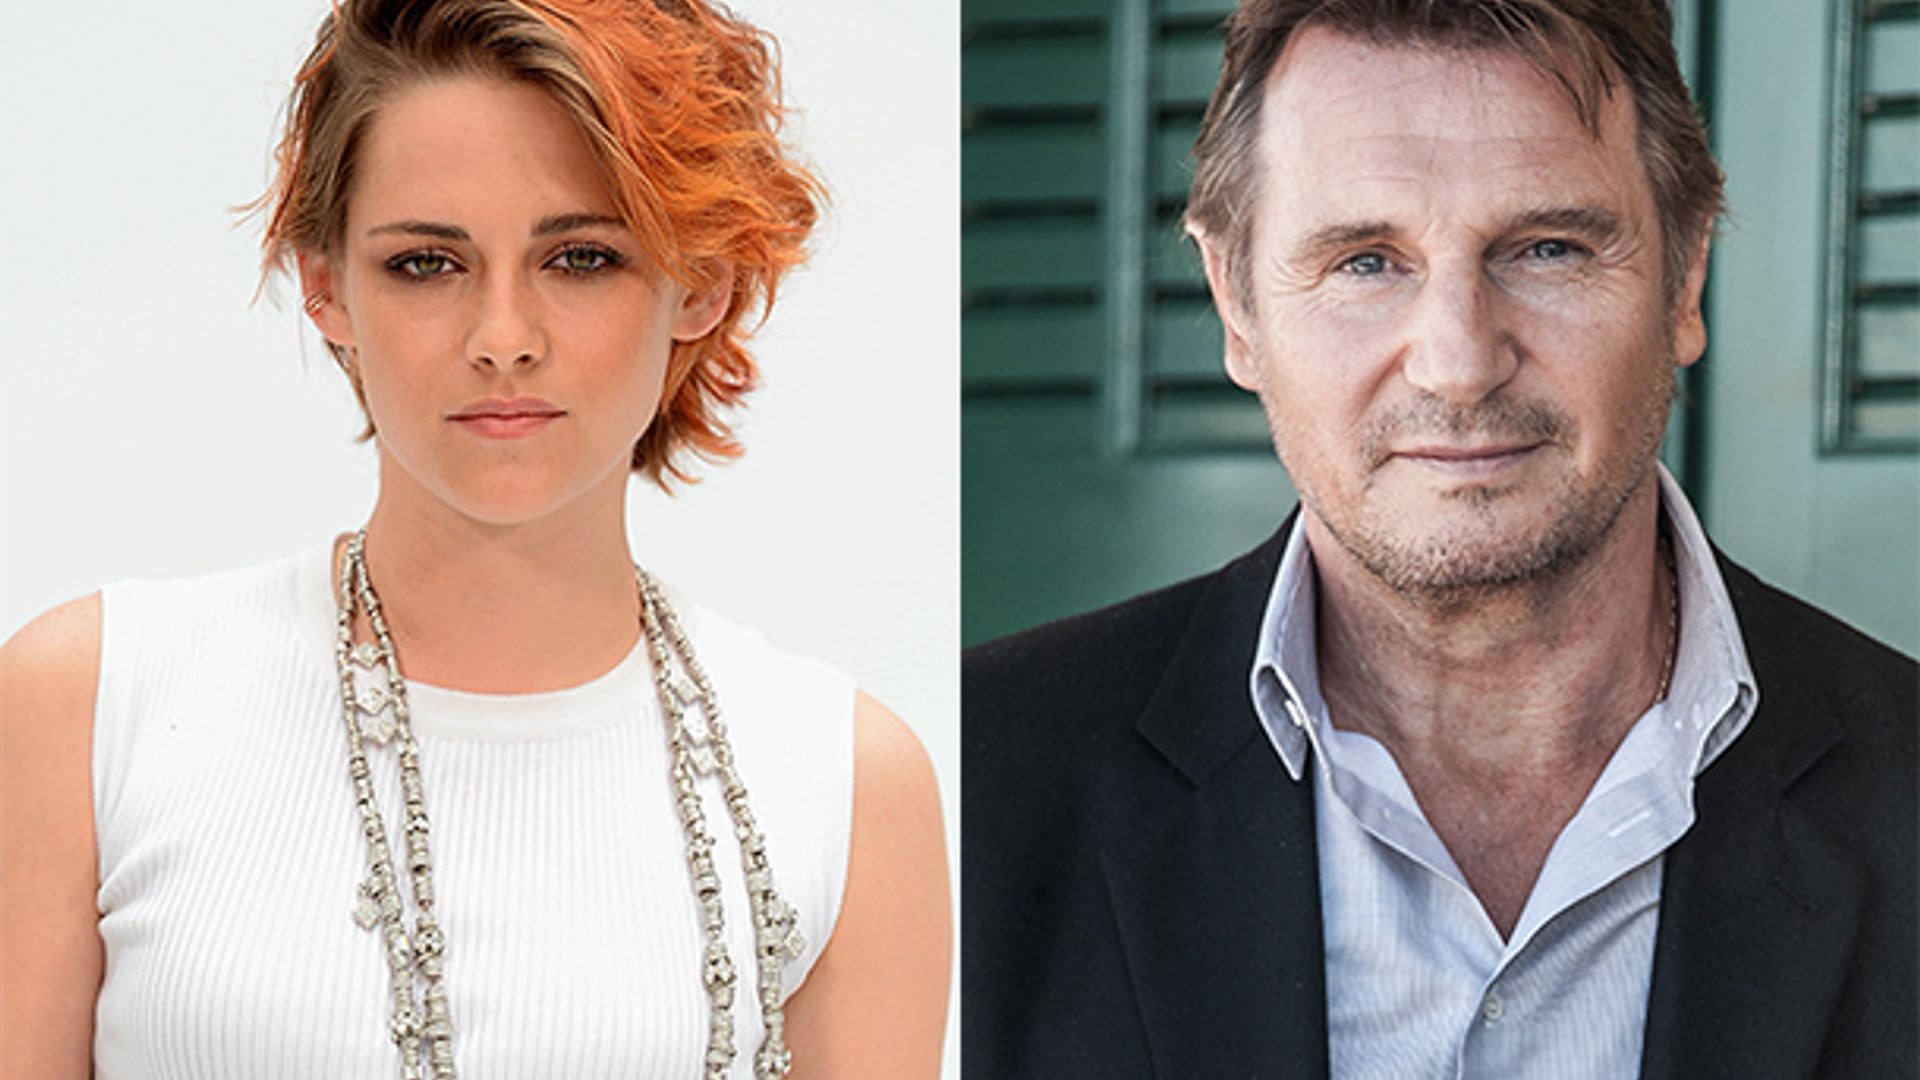 Liam Neeson responds to reports he is dating Kristen Stewart